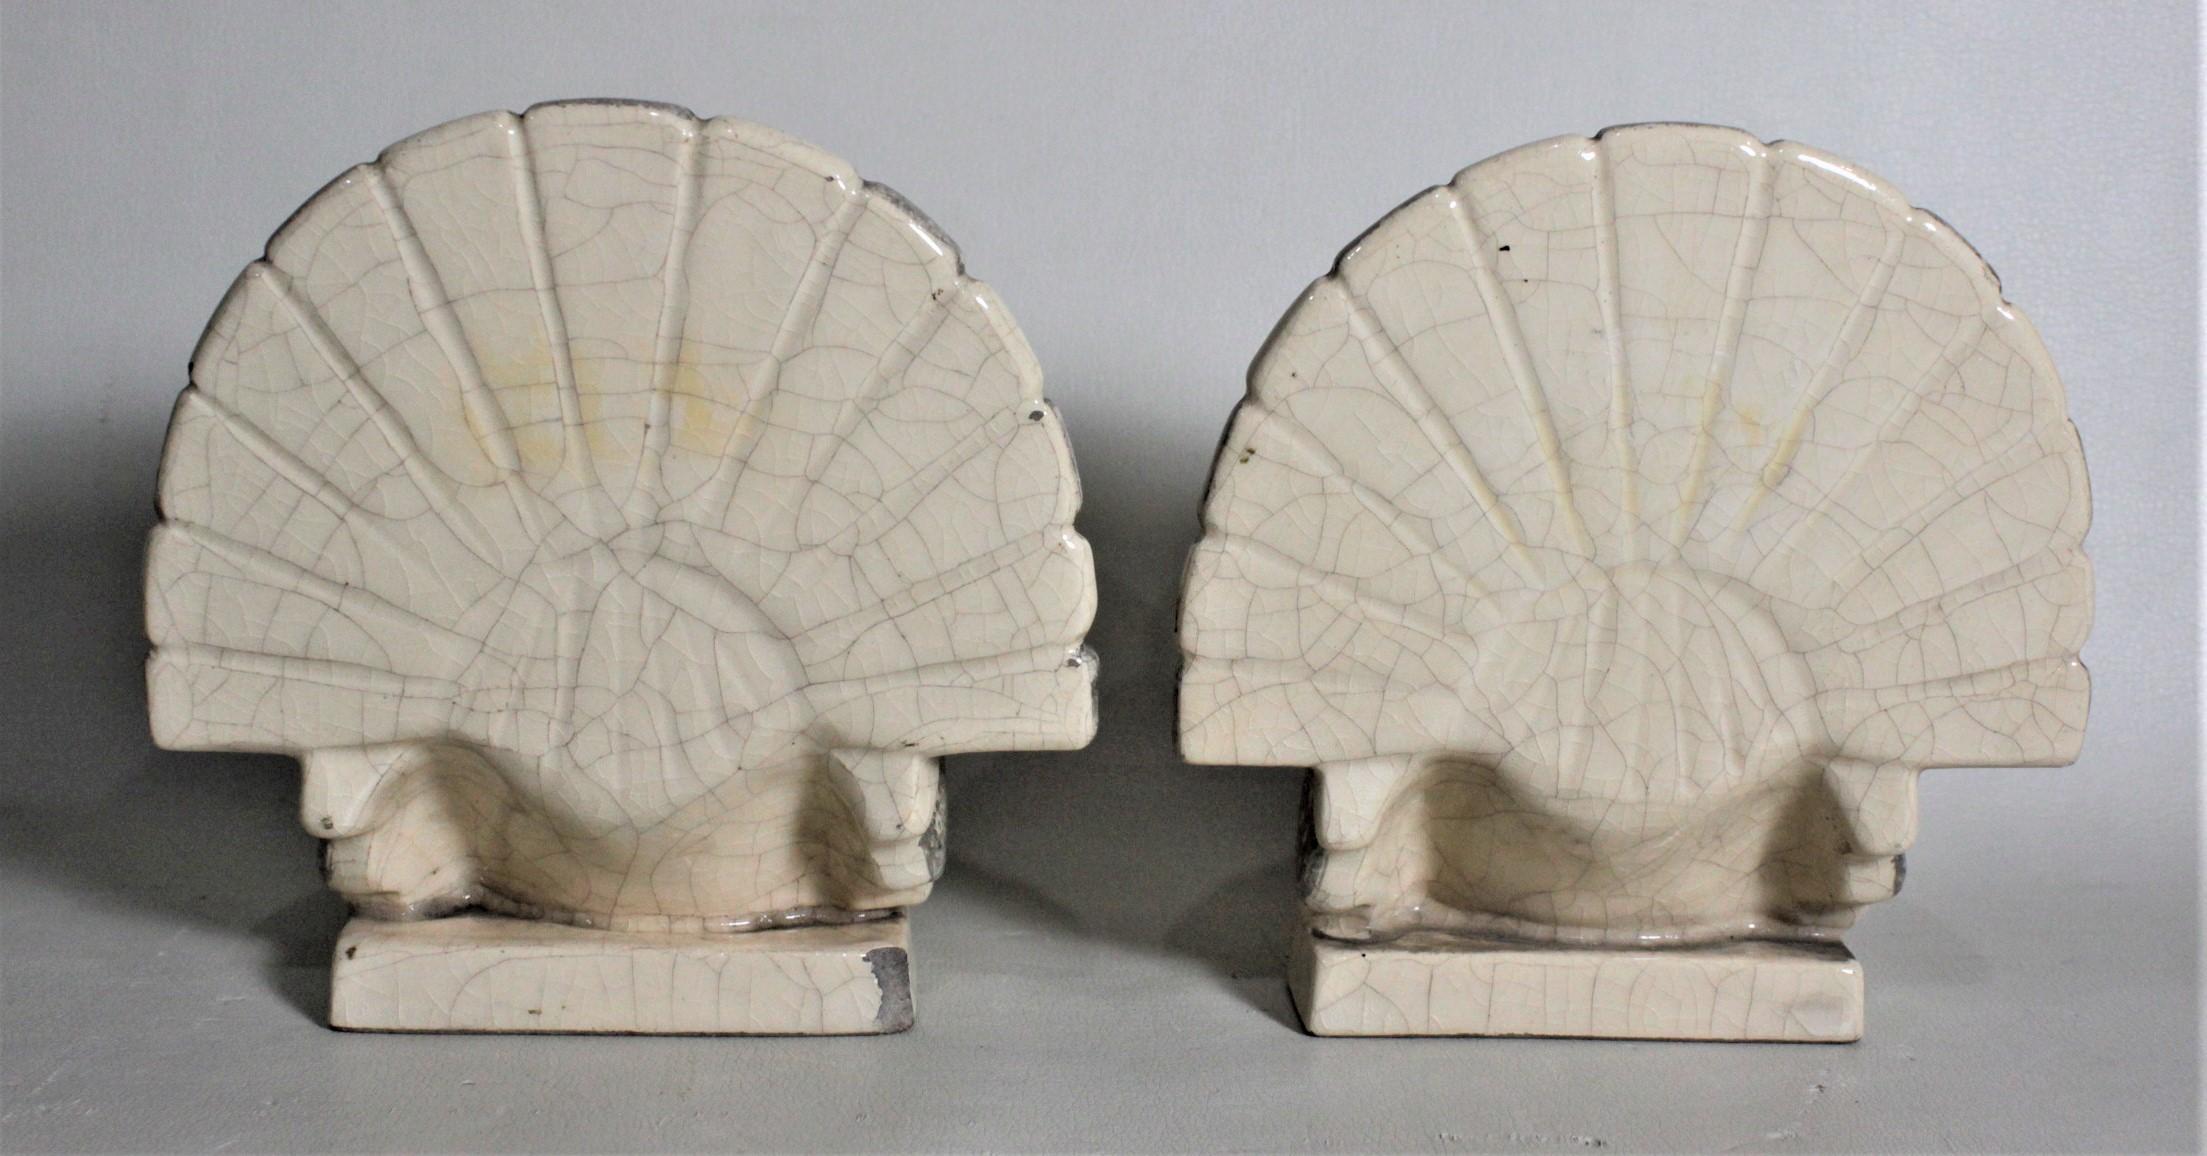 Art Deco Figural Ceramic Turkey Bookends in Taupe and Charcoal Grey Luster Glaze For Sale 2